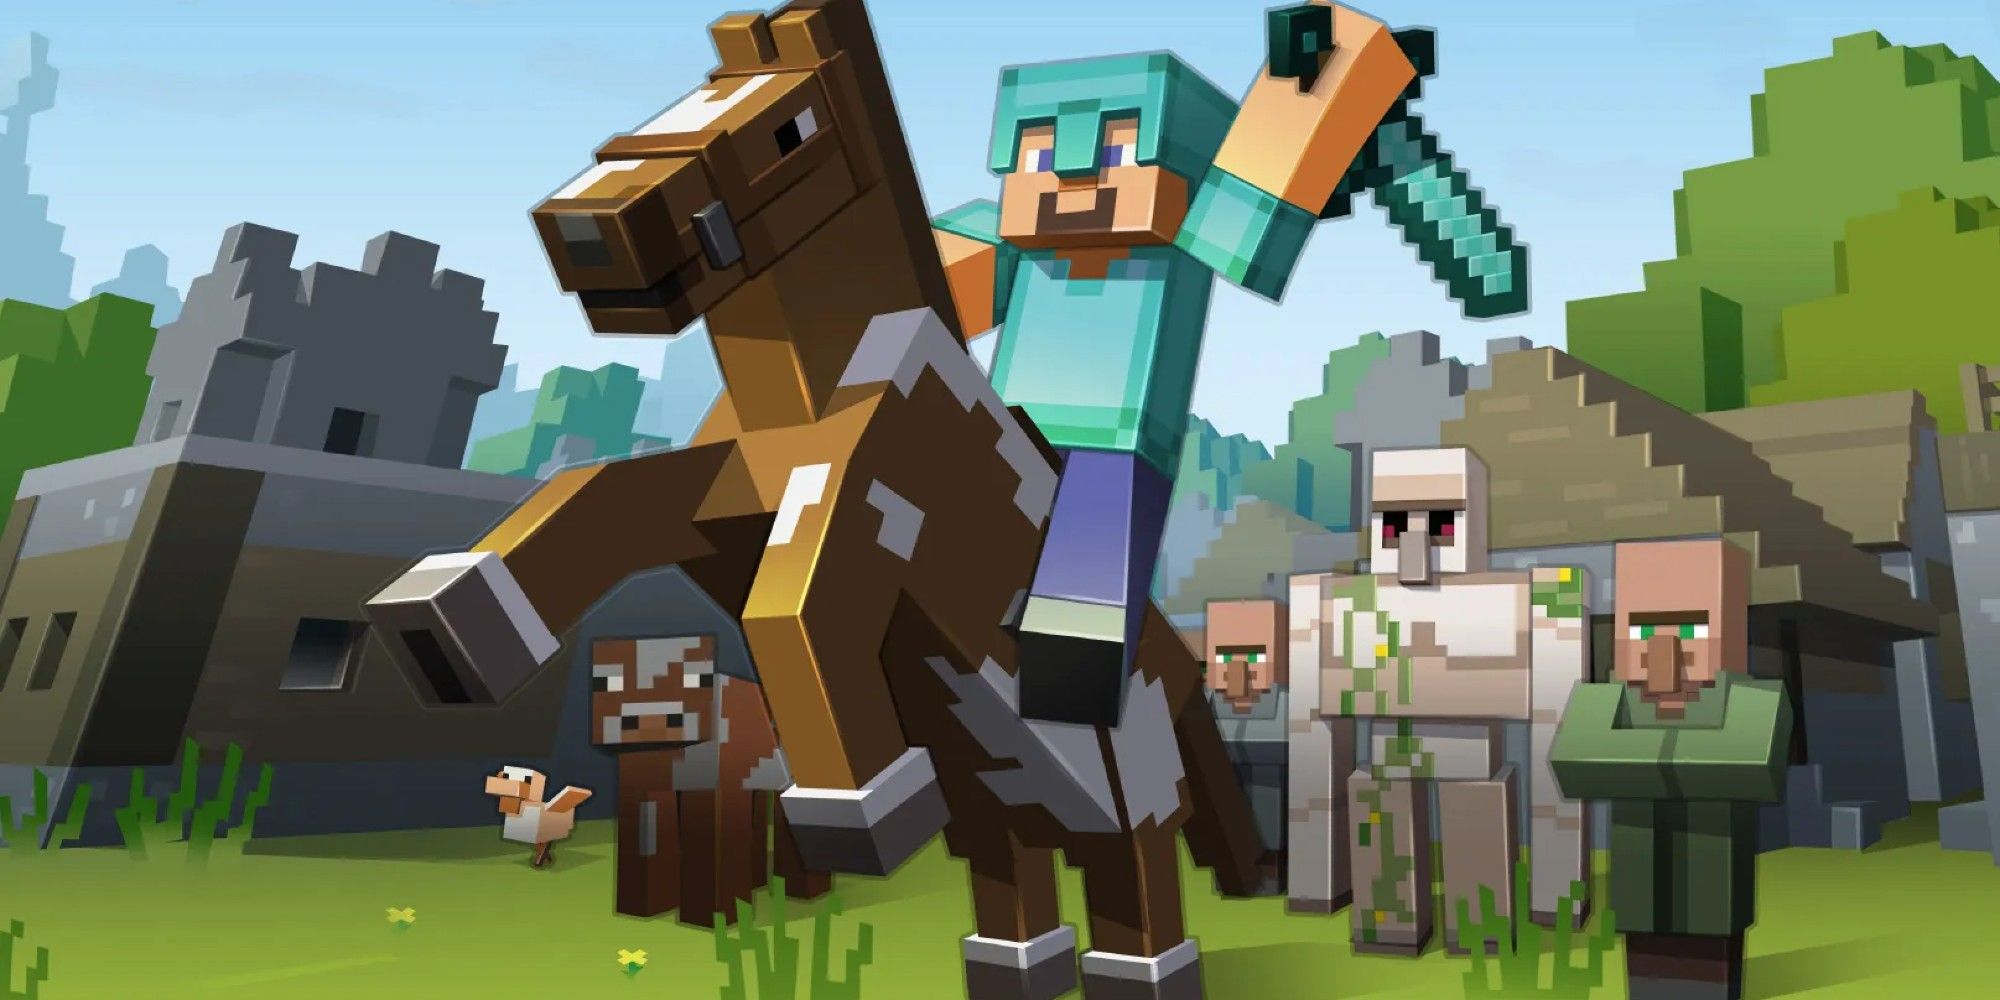 Steve riding a horse in Minecraft